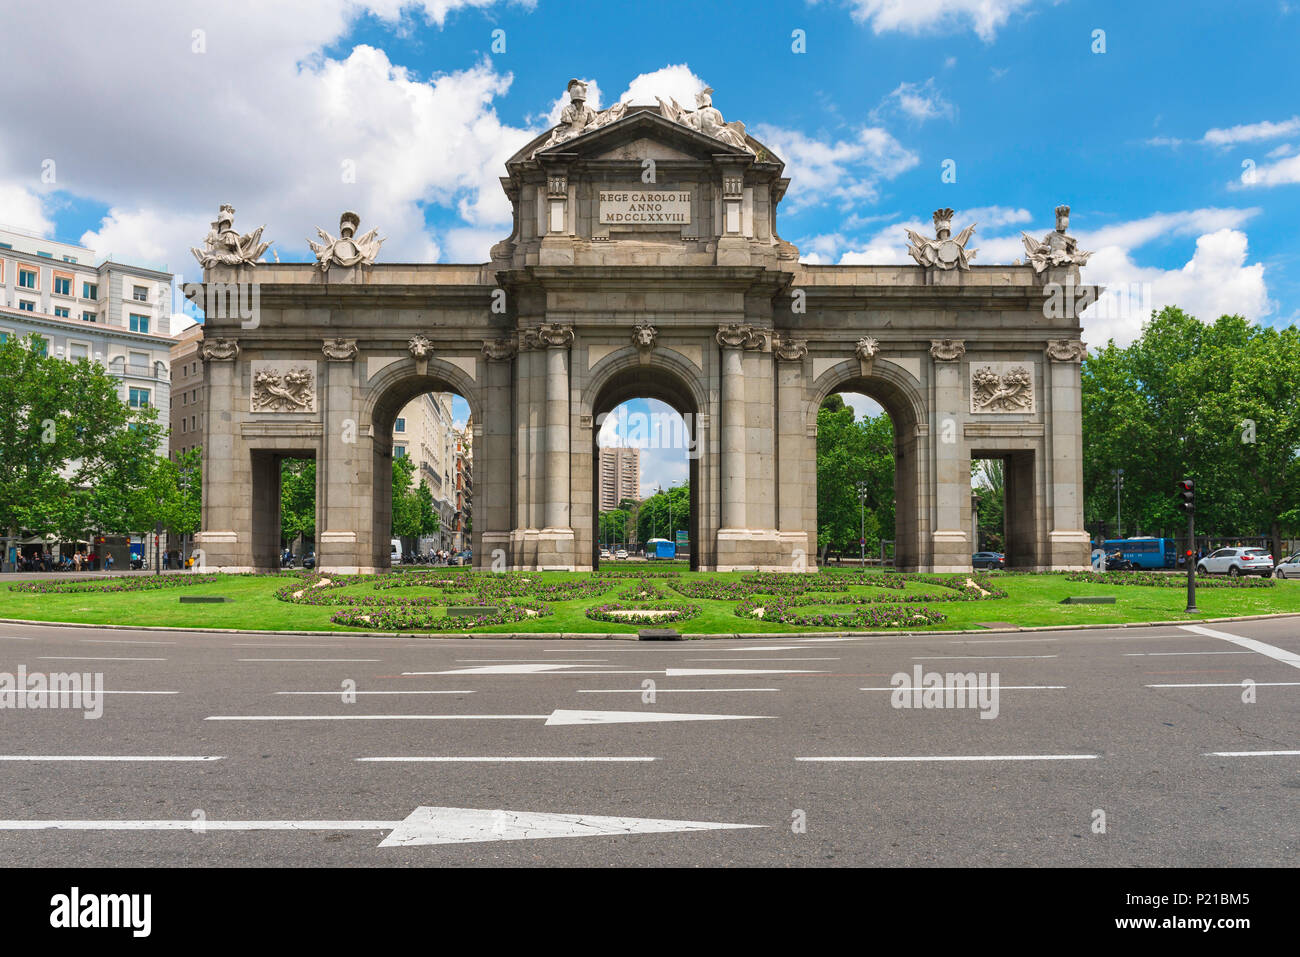 Plaza de la Independencia Madrid, view of the old city gate - the Puerta Alcala - in the Plaza de la Independencia, Madrid, Spain. Stock Photo